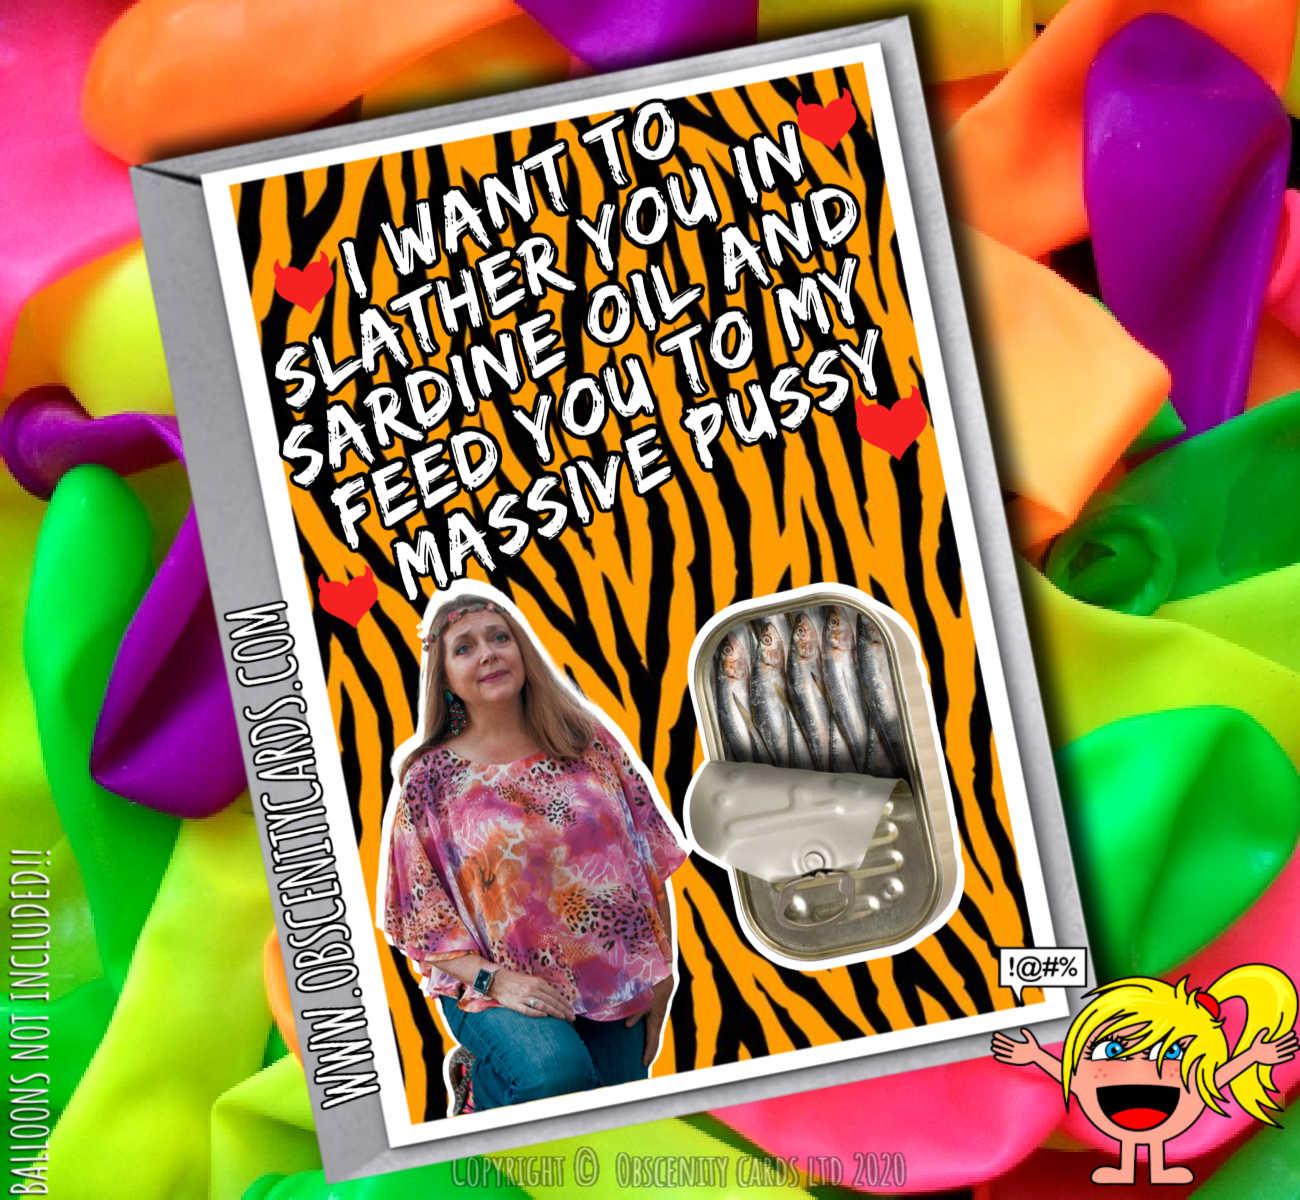 SLATHER YOU IN SARDINE OIL FEED YOU TO MY MASSIVE PUSSY CAROLE BASKIN TIGER KING FUNNY CARD